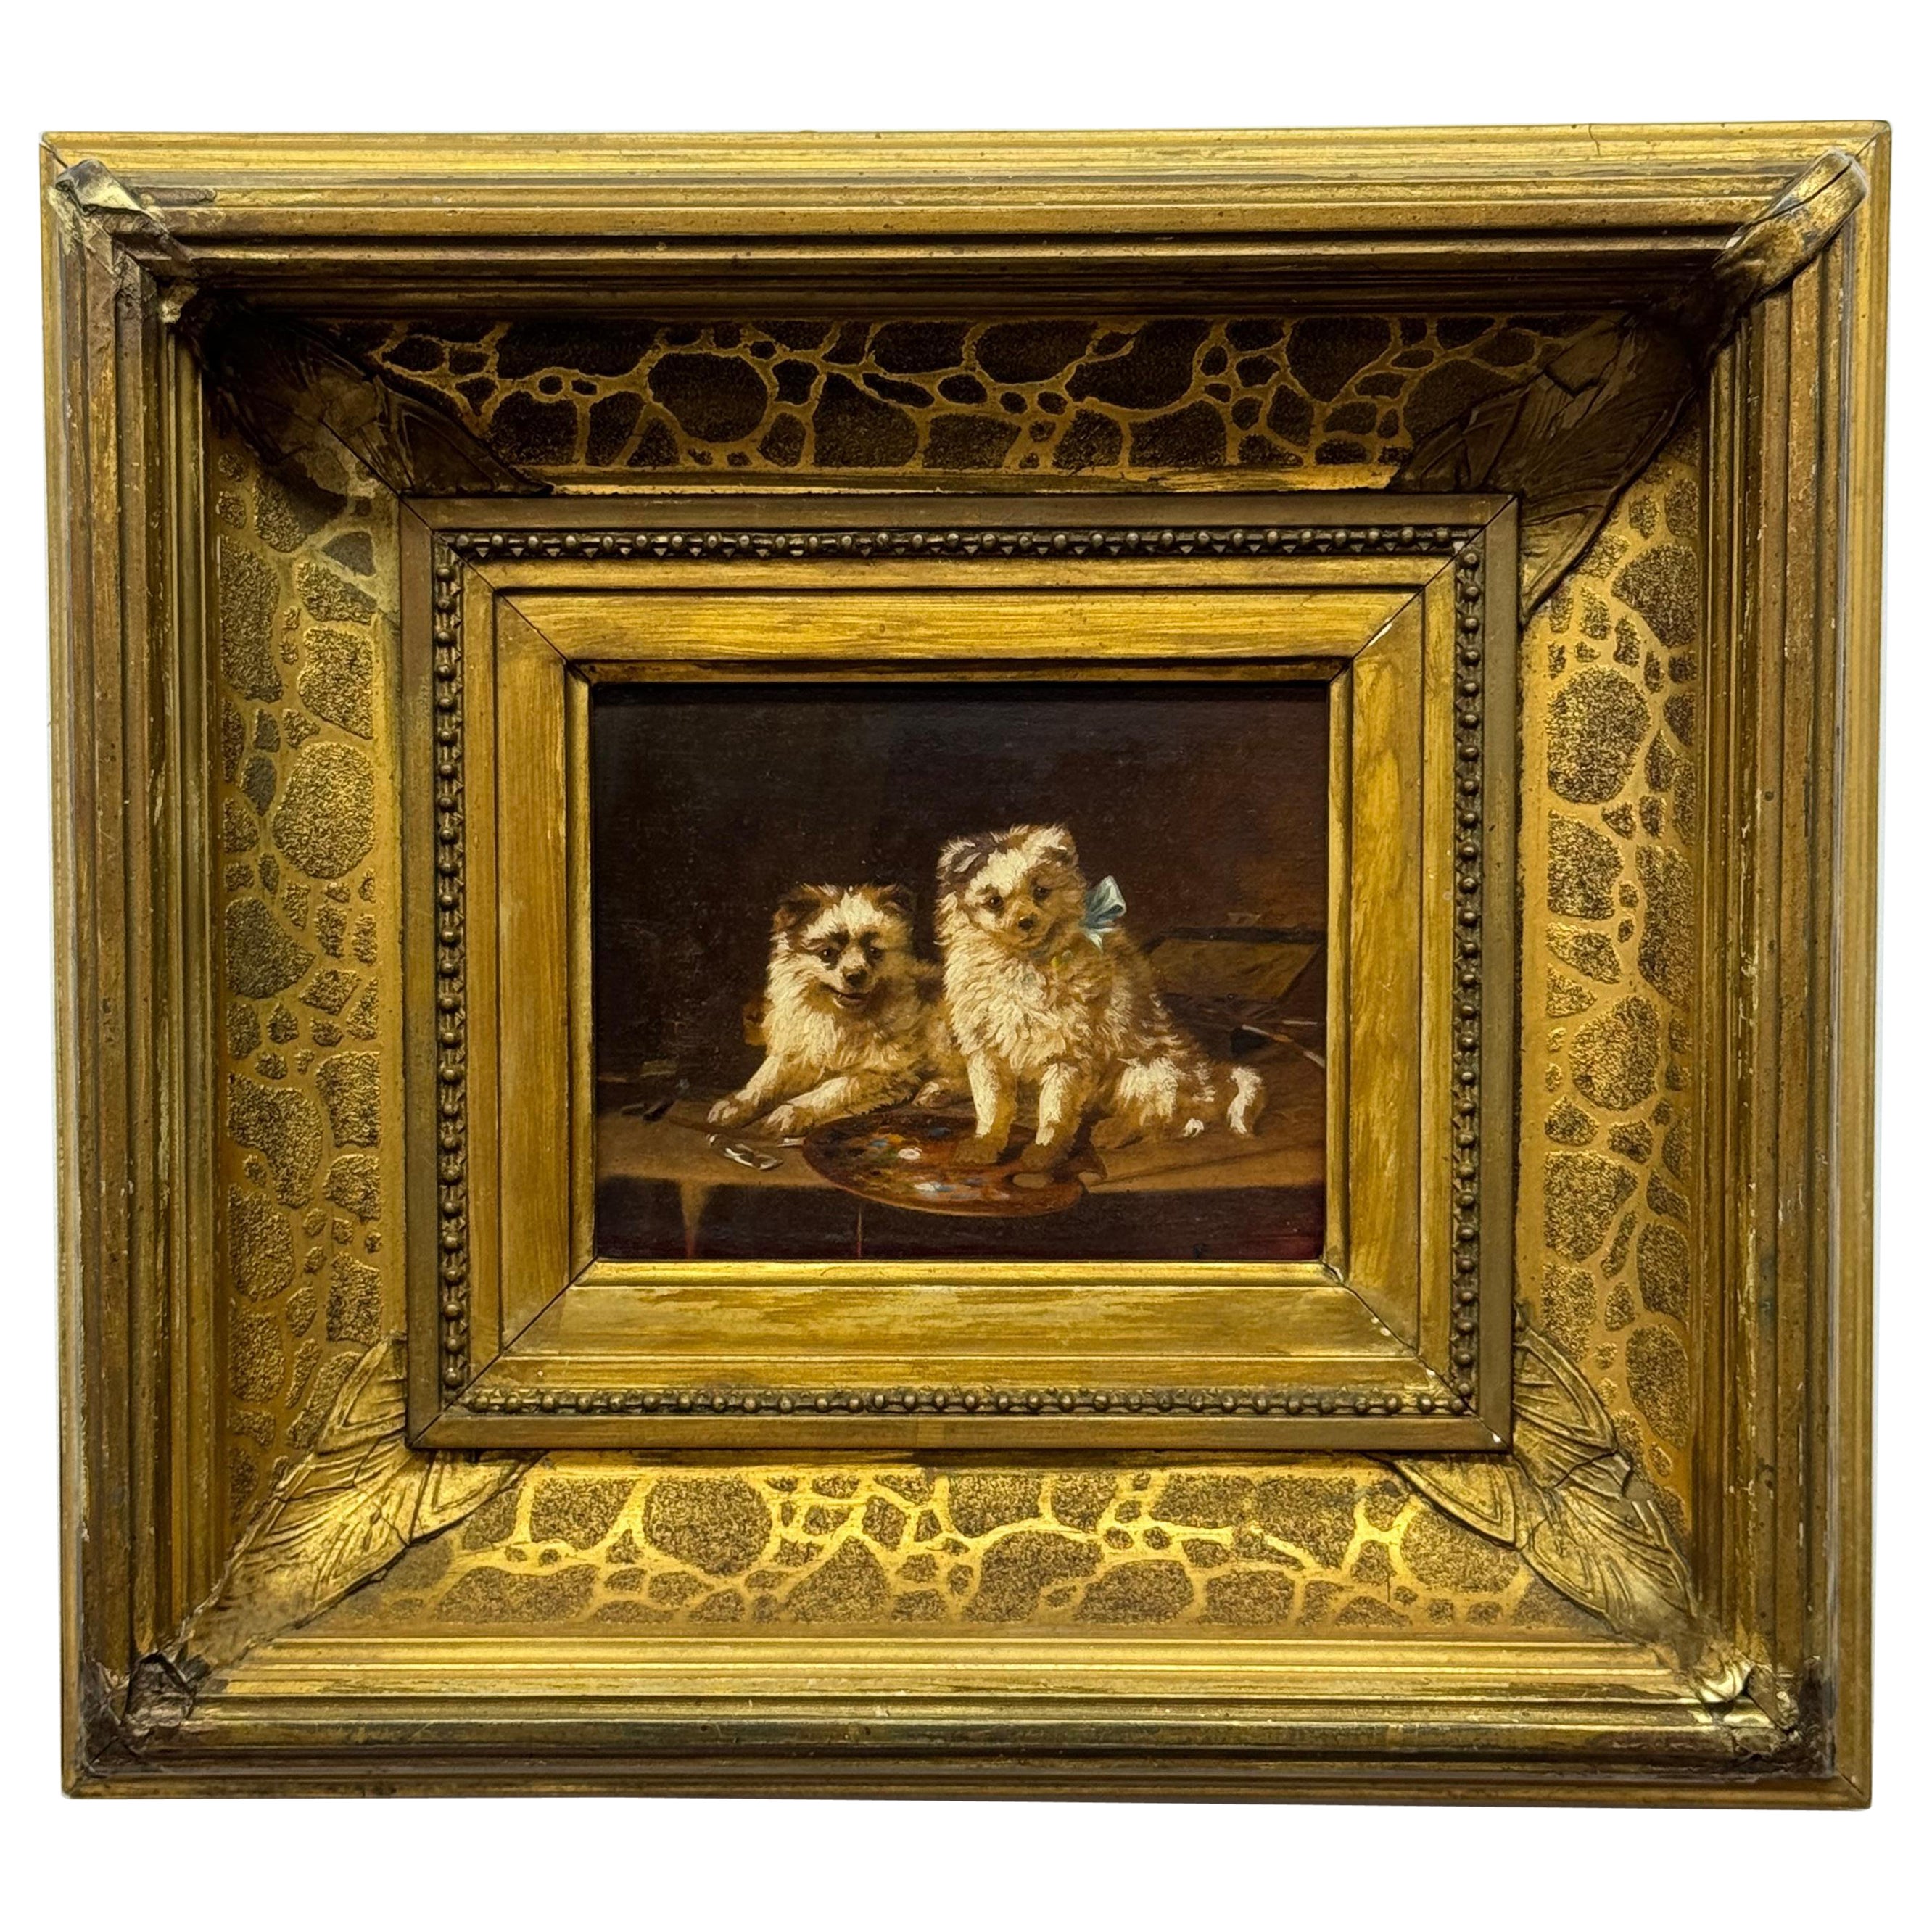 Unknown Animal Painting - Absolutely beautiful and charming 19th century portrait painting of two dogs